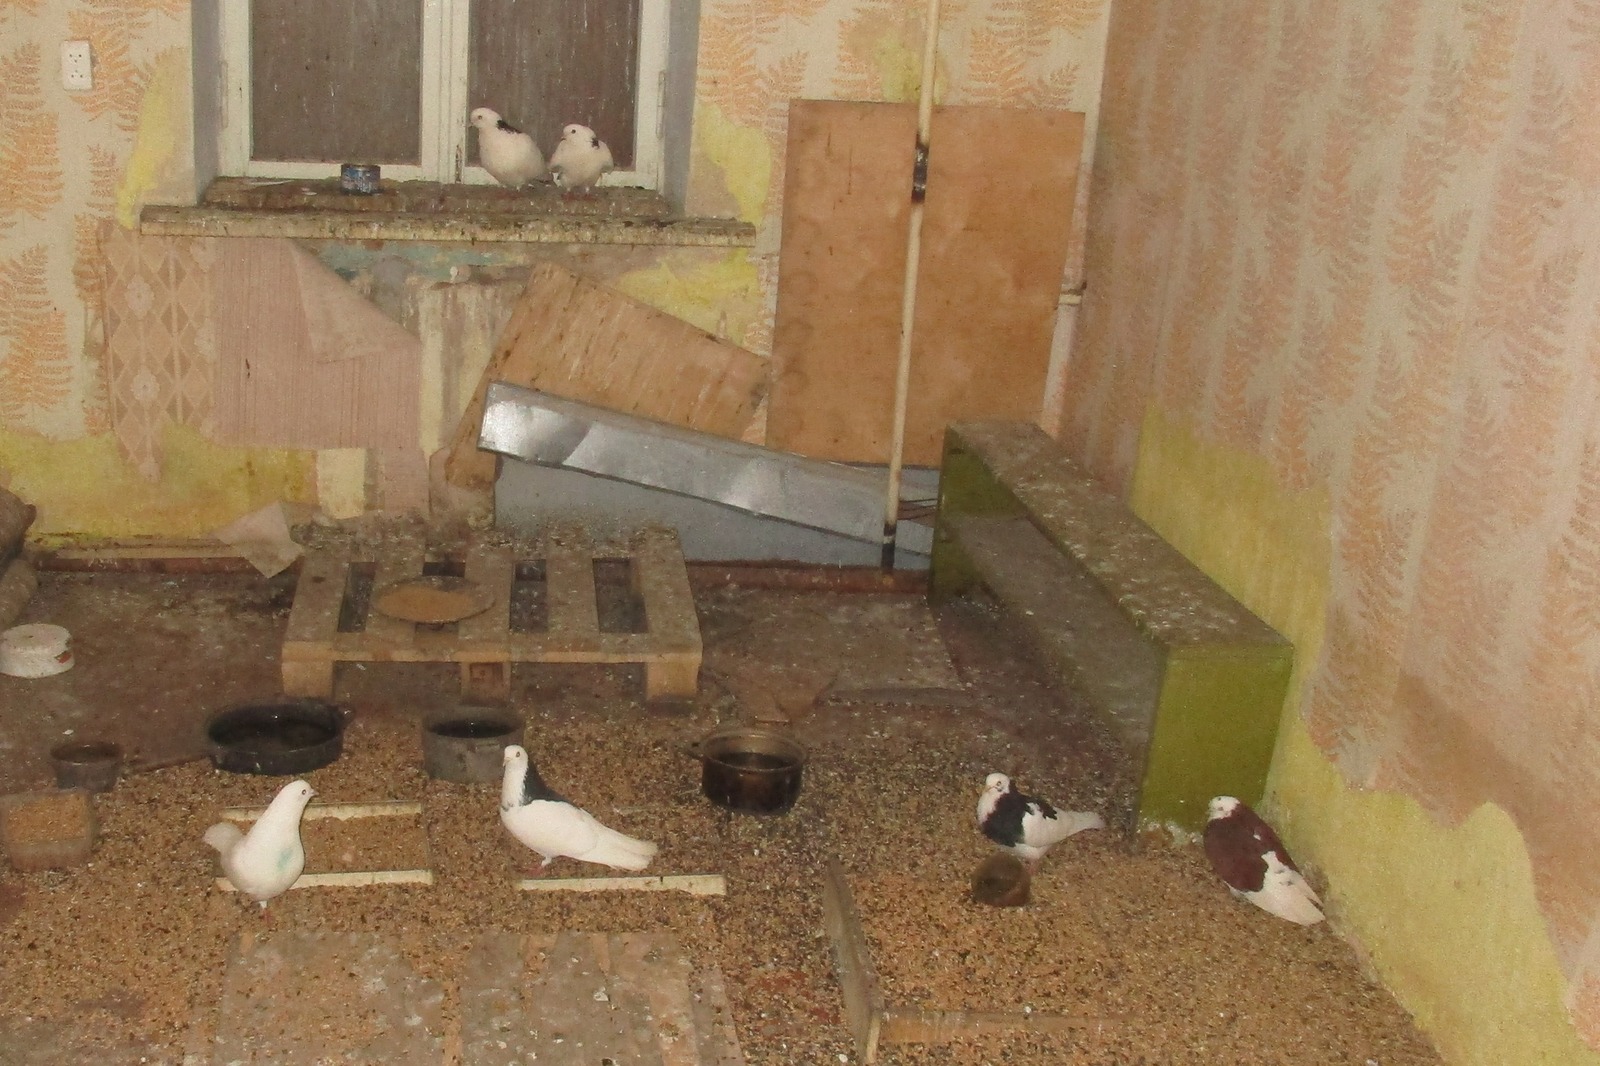 To survive people from the house, the raider developer bred pigeons and rats in the apartment - Rat, Pigeon, Apartment raiders, Longpost, No rating, Threat, Video, Negative, Voronezh